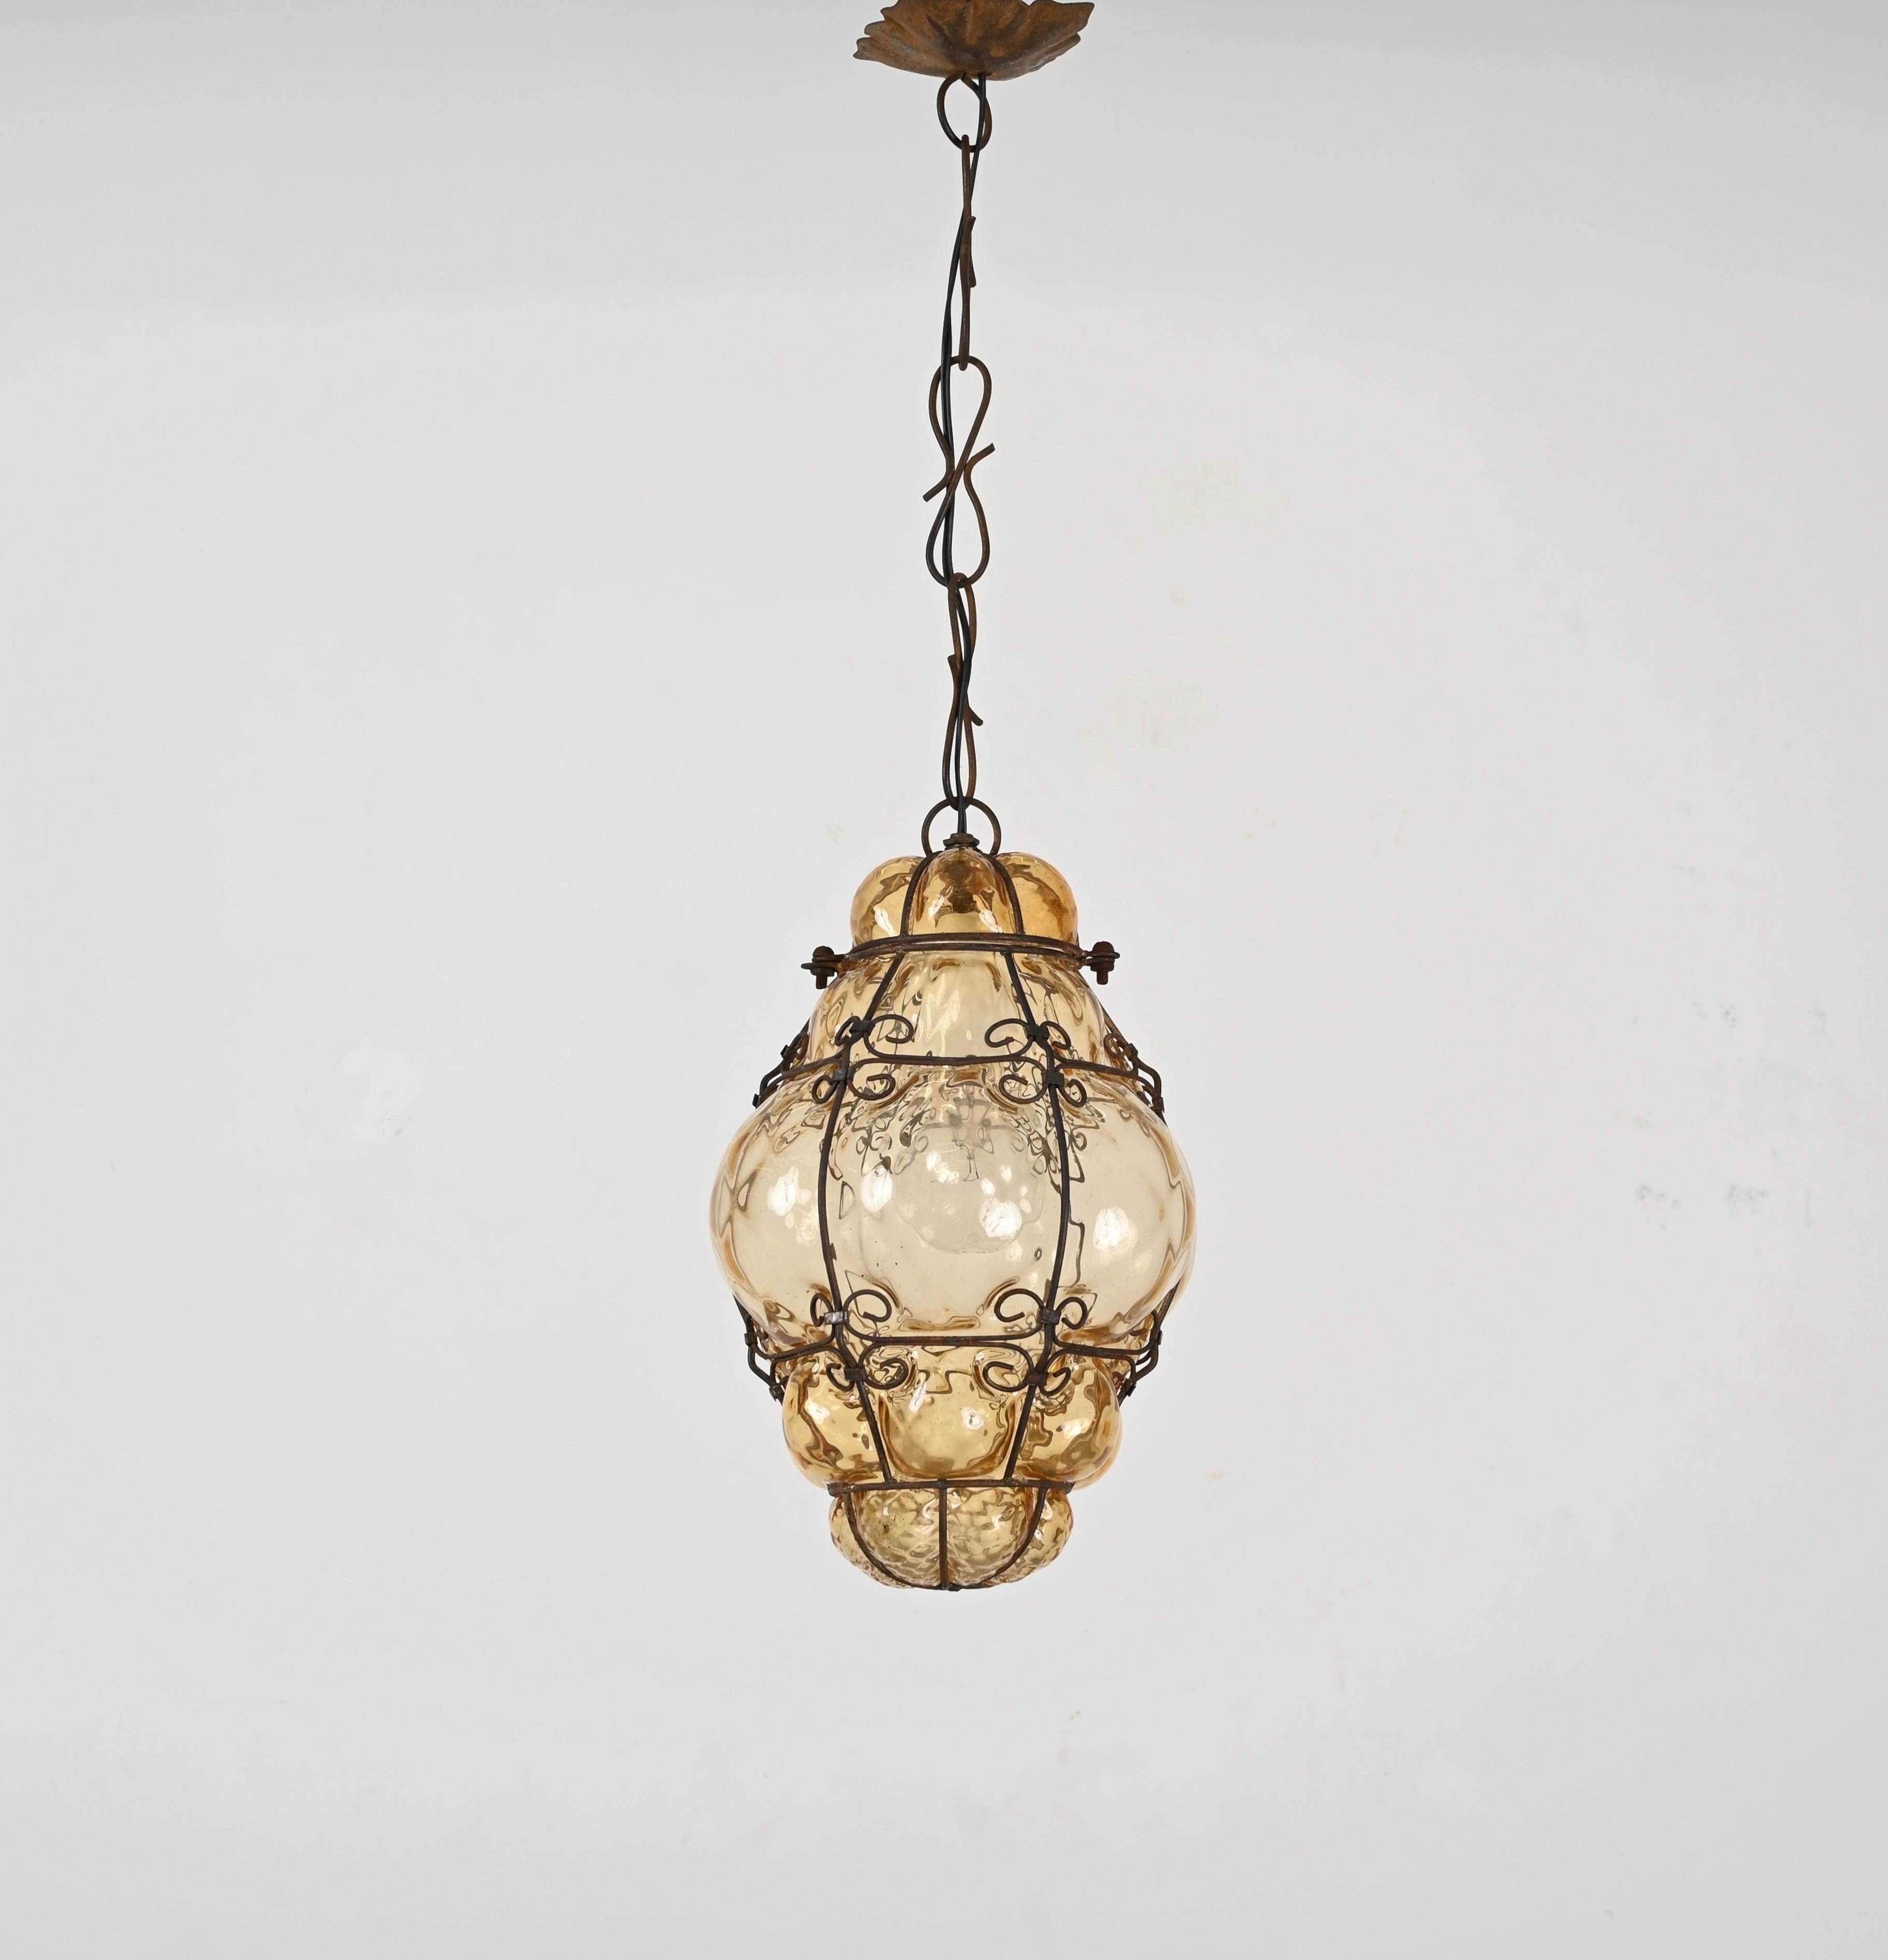 Venetian Murano Mouthblown Amber Glass Chandelier with Iron Frame, Italy 1940s For Sale 2